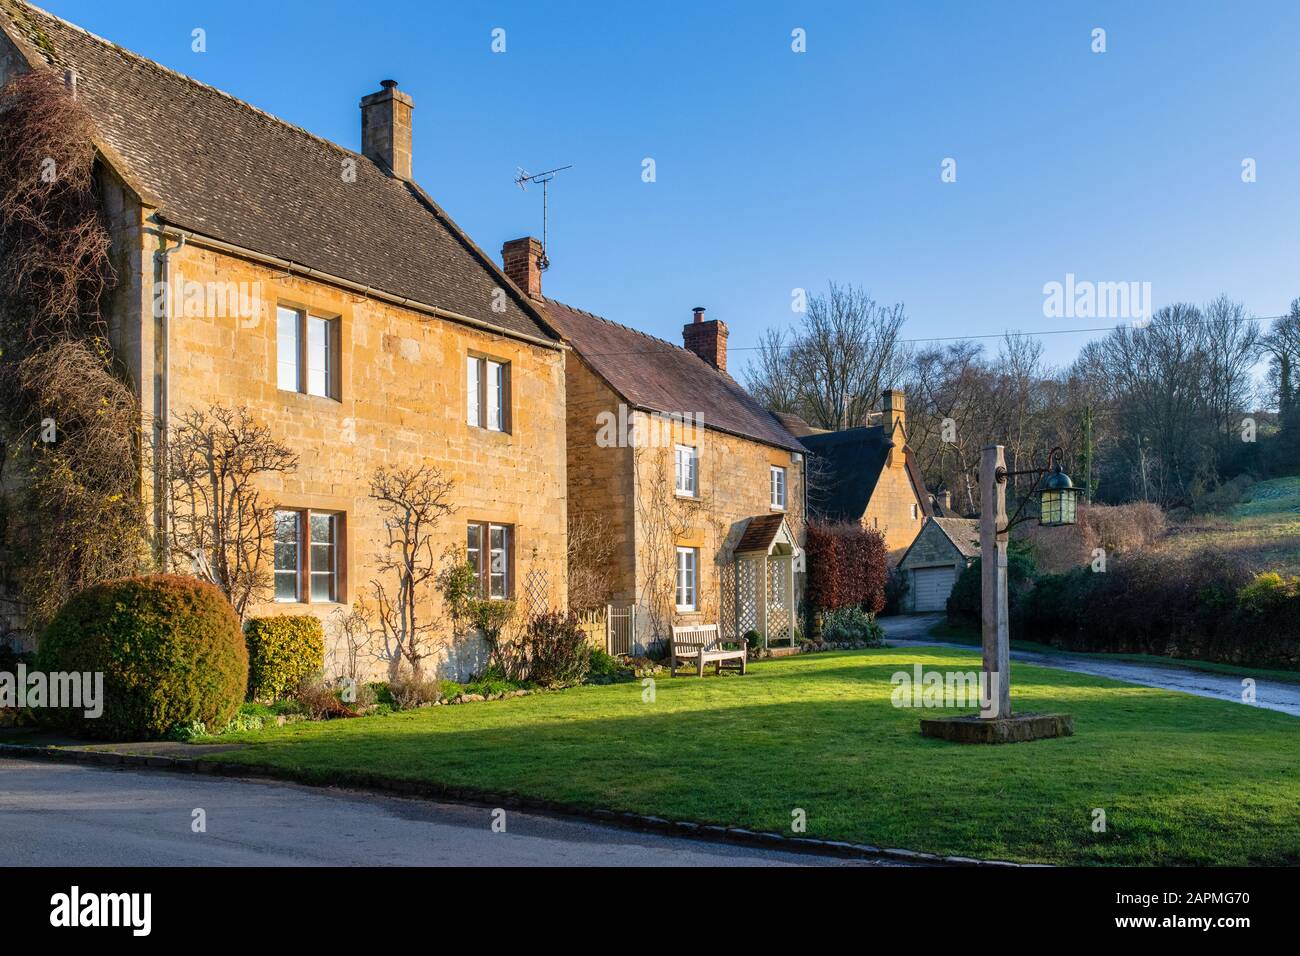 Cotswold cottage in pietra in inverno luce del sole al tramonto. Stanton, Cotswolds, Gloucestershire, Inghilterra Foto Stock